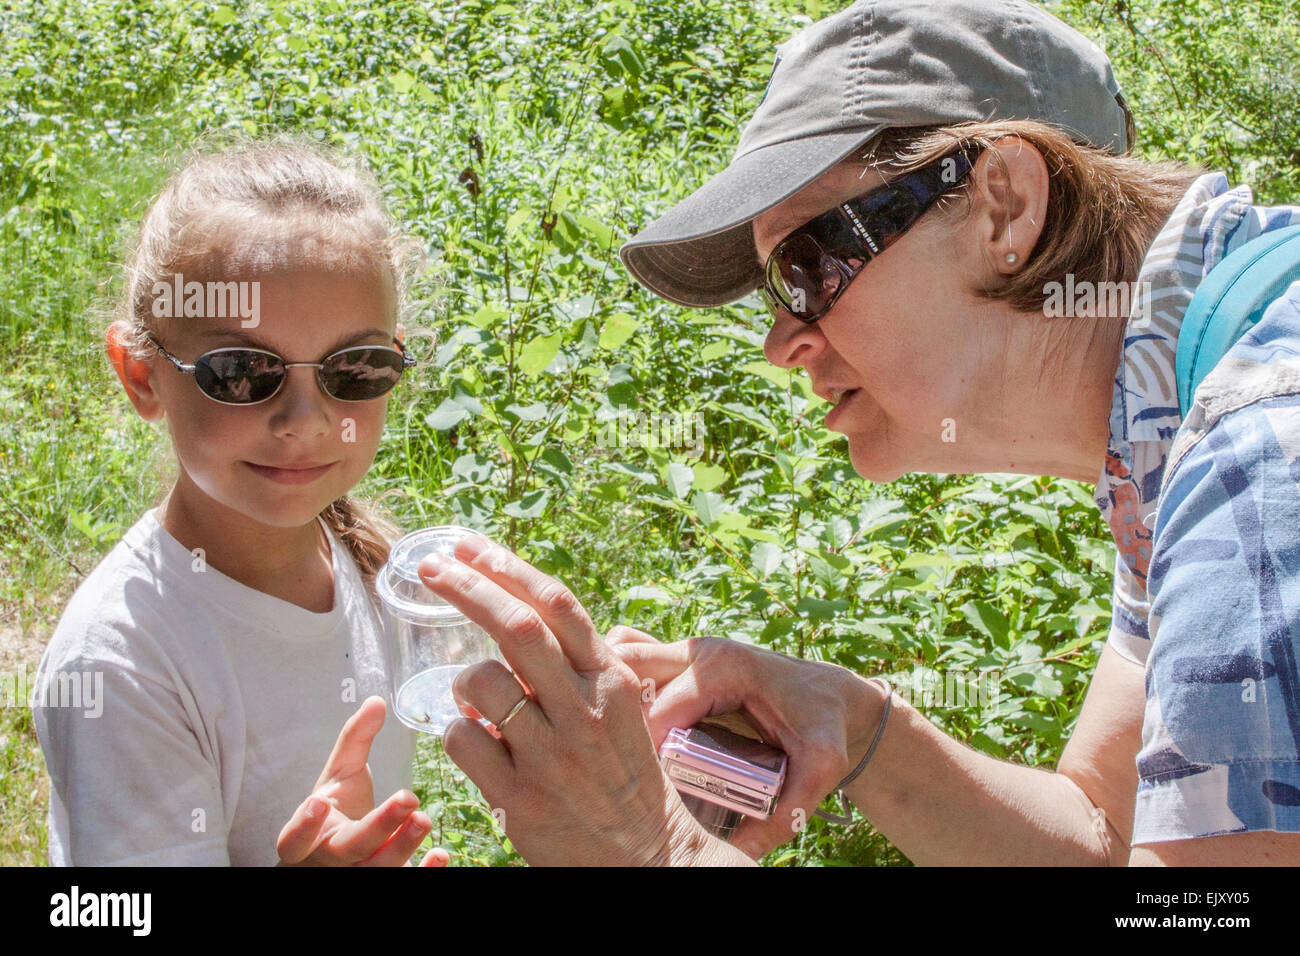 Teacher and student examining an insect in a jar Stock Photo